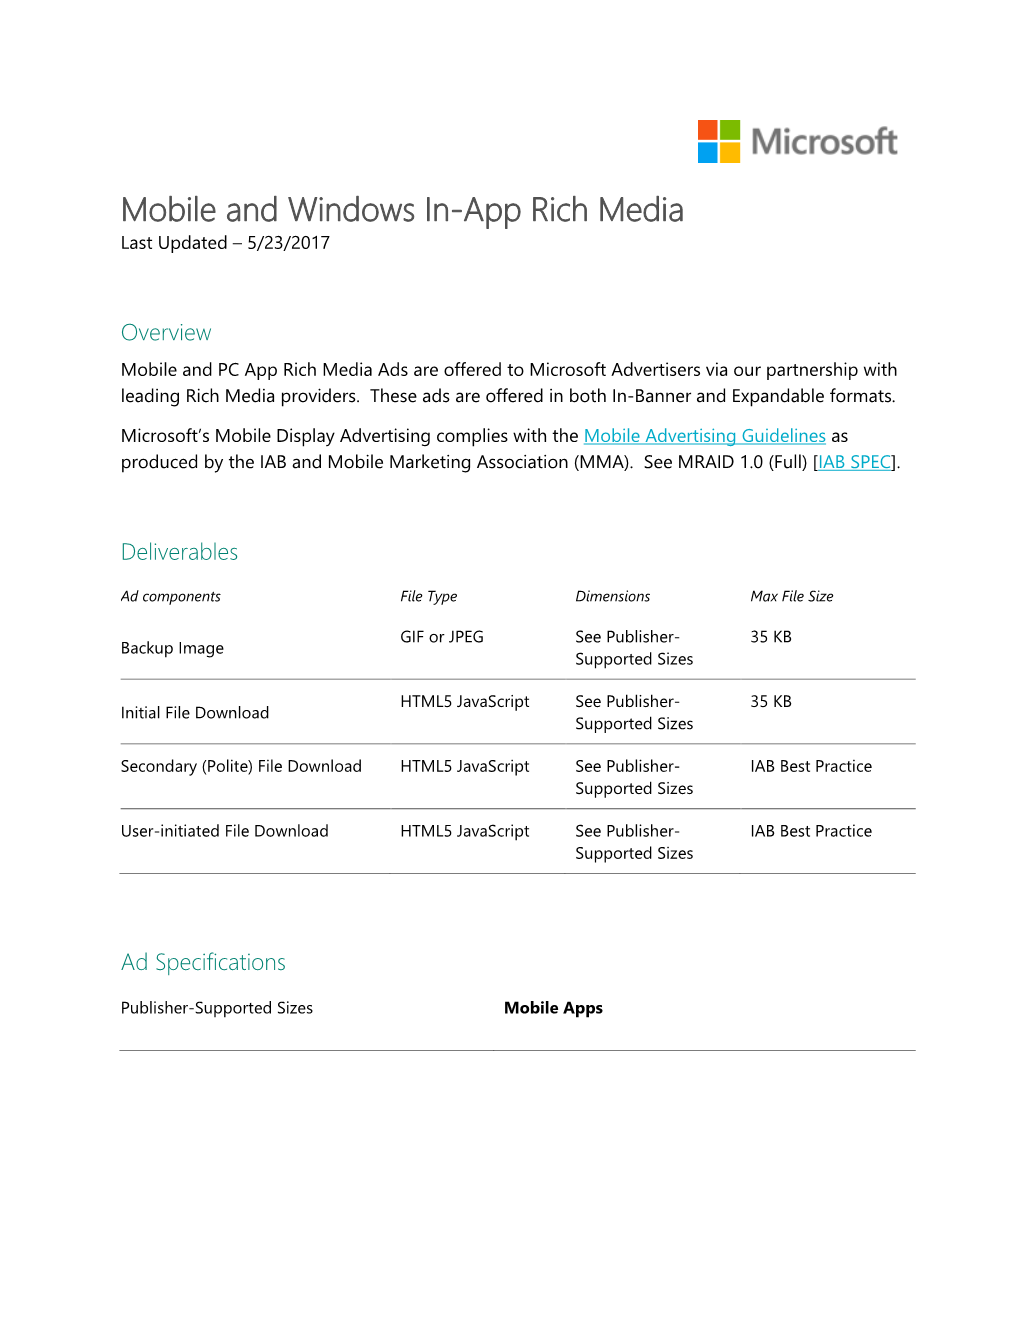 Mobile and Windows In-App Rich Media Last Updated – 5/23/2017